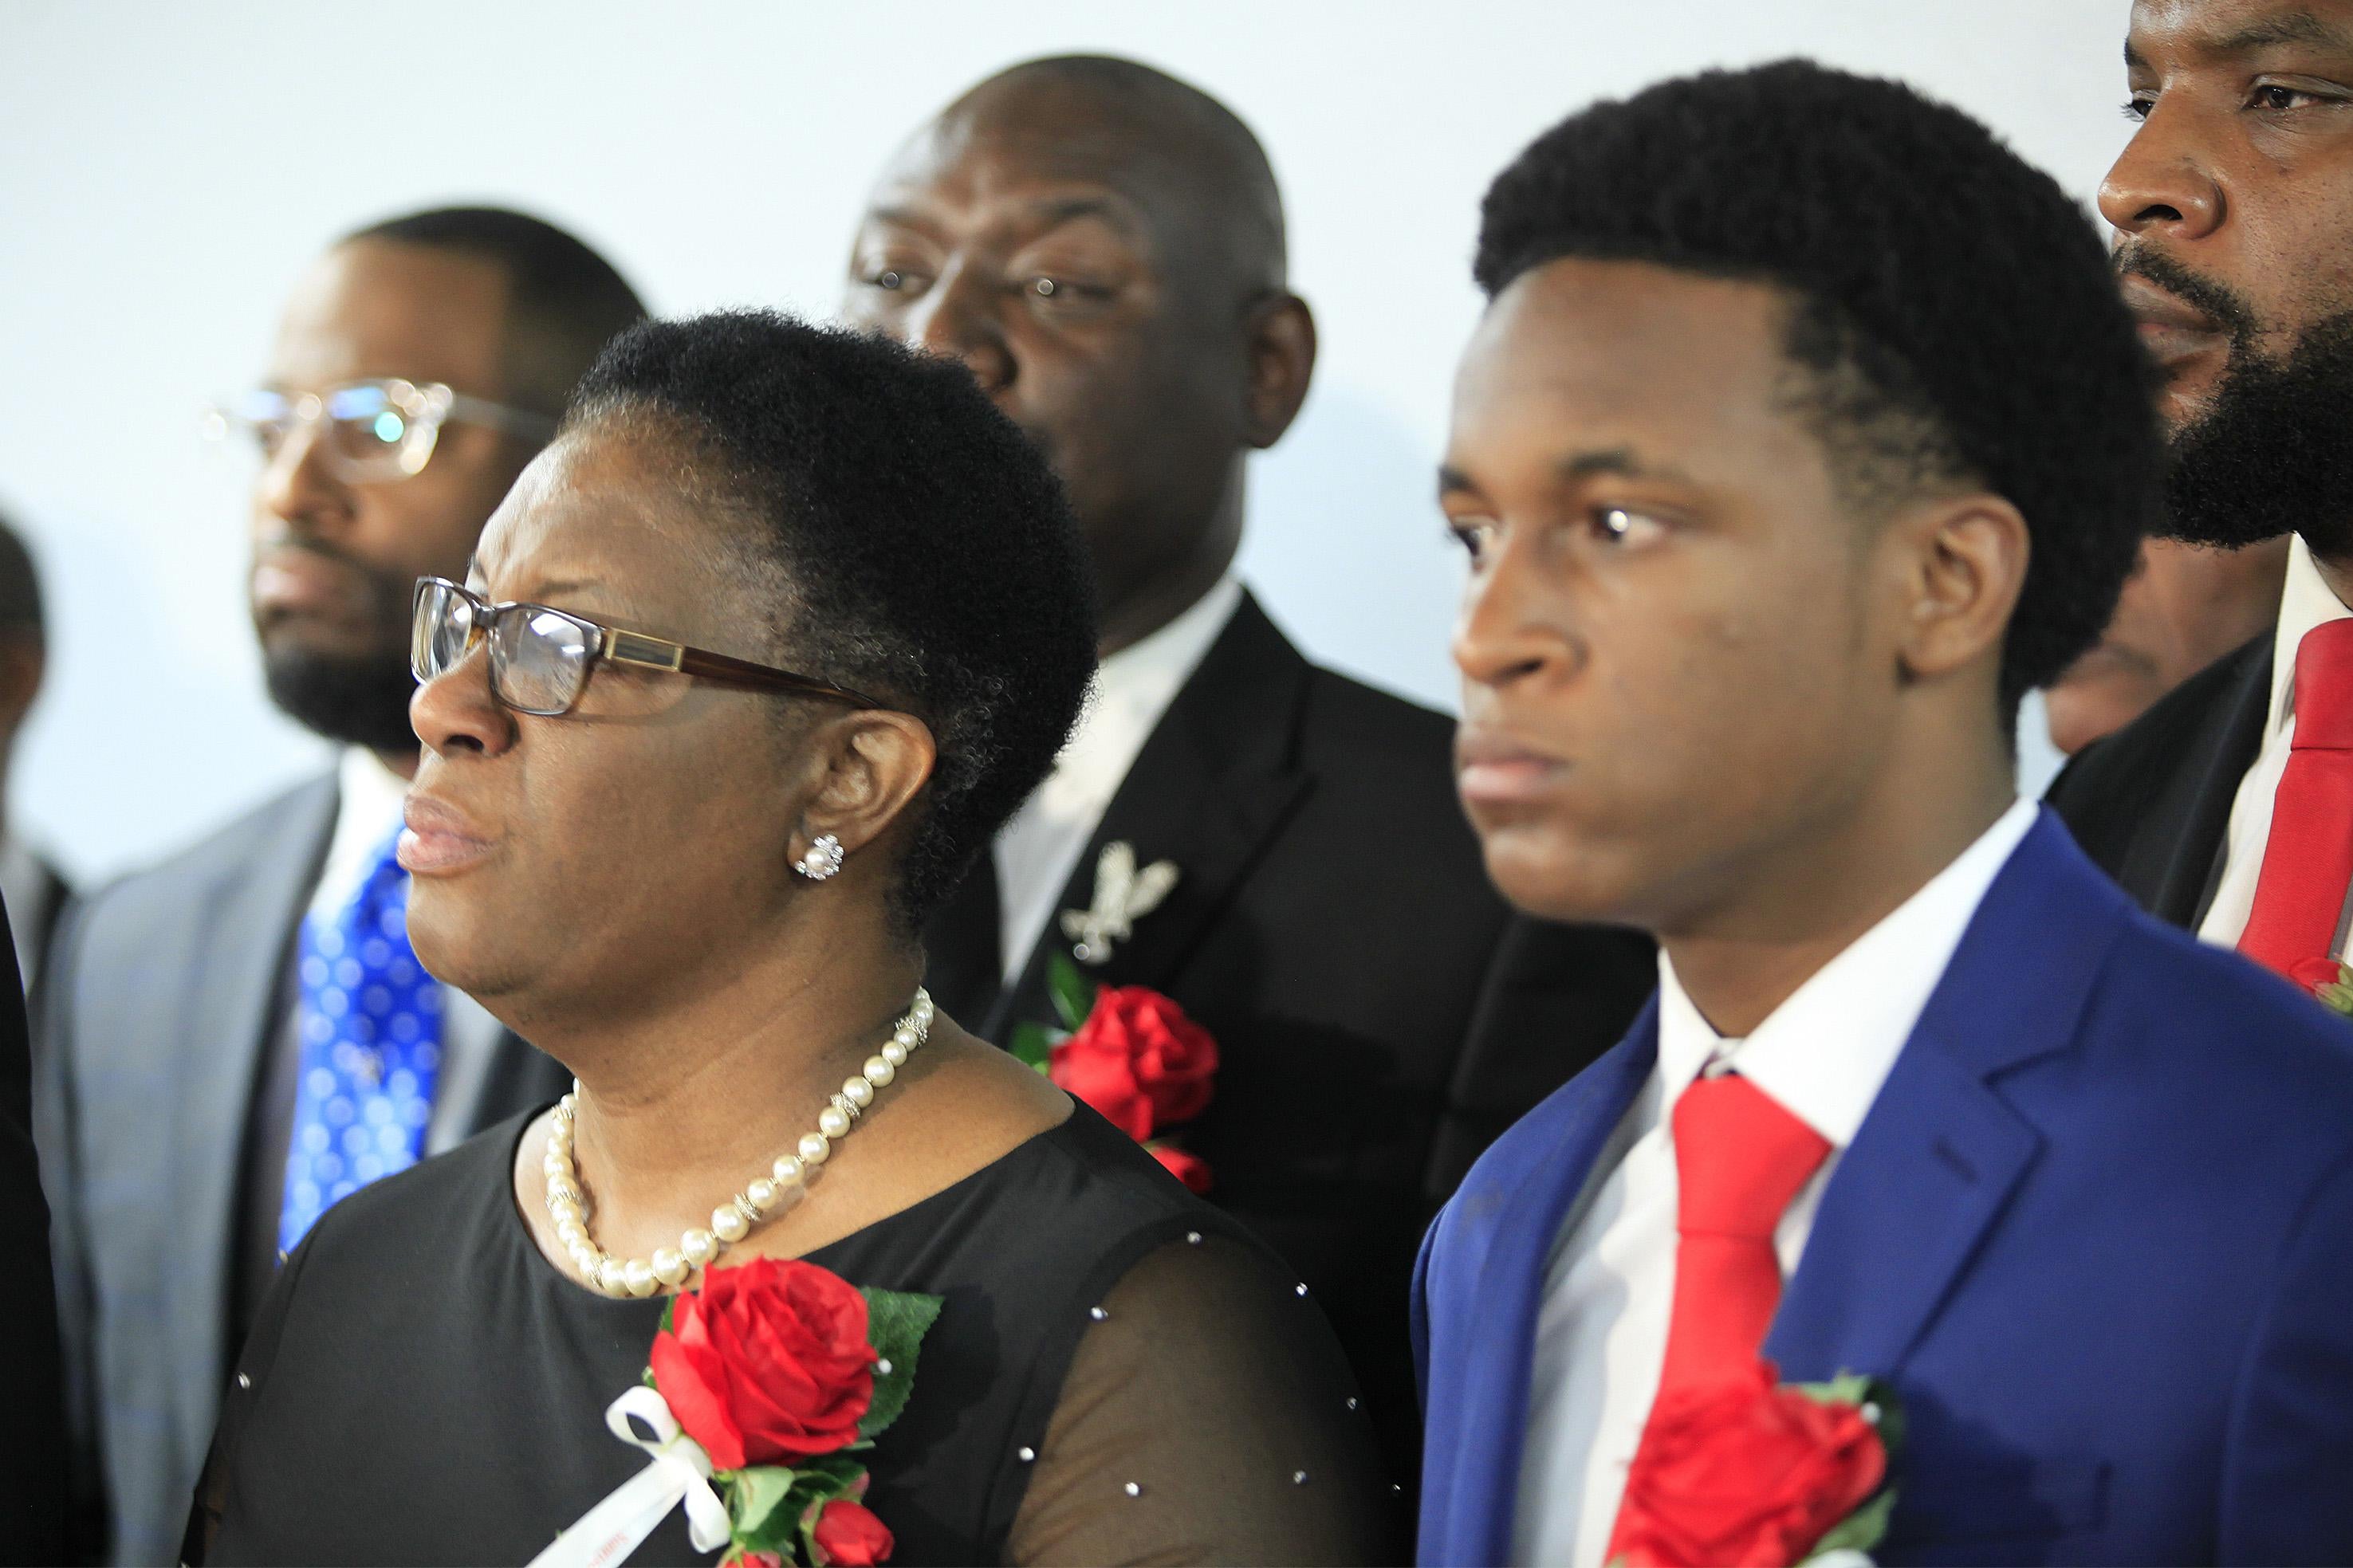 Allison Jean, mother of Botham Shem Jean, stands with family and church members of Greenville Avenue Church of Christ after the funeral service on Sept. 13, 2018, in Richardson, Texas.